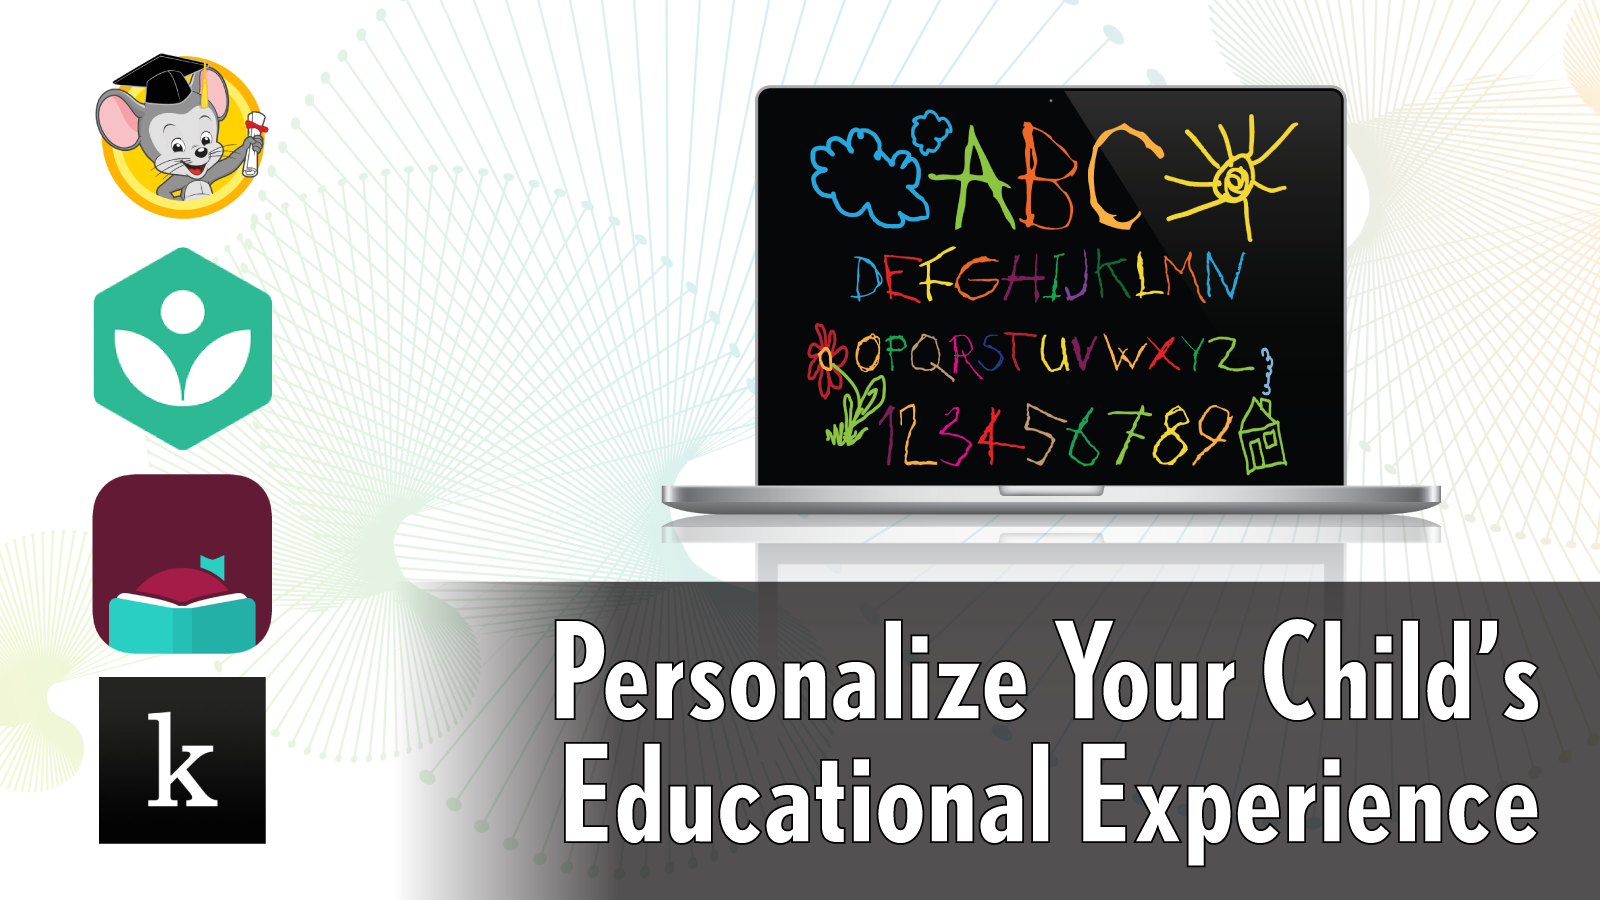 Personalize Your Child's Educational Experience